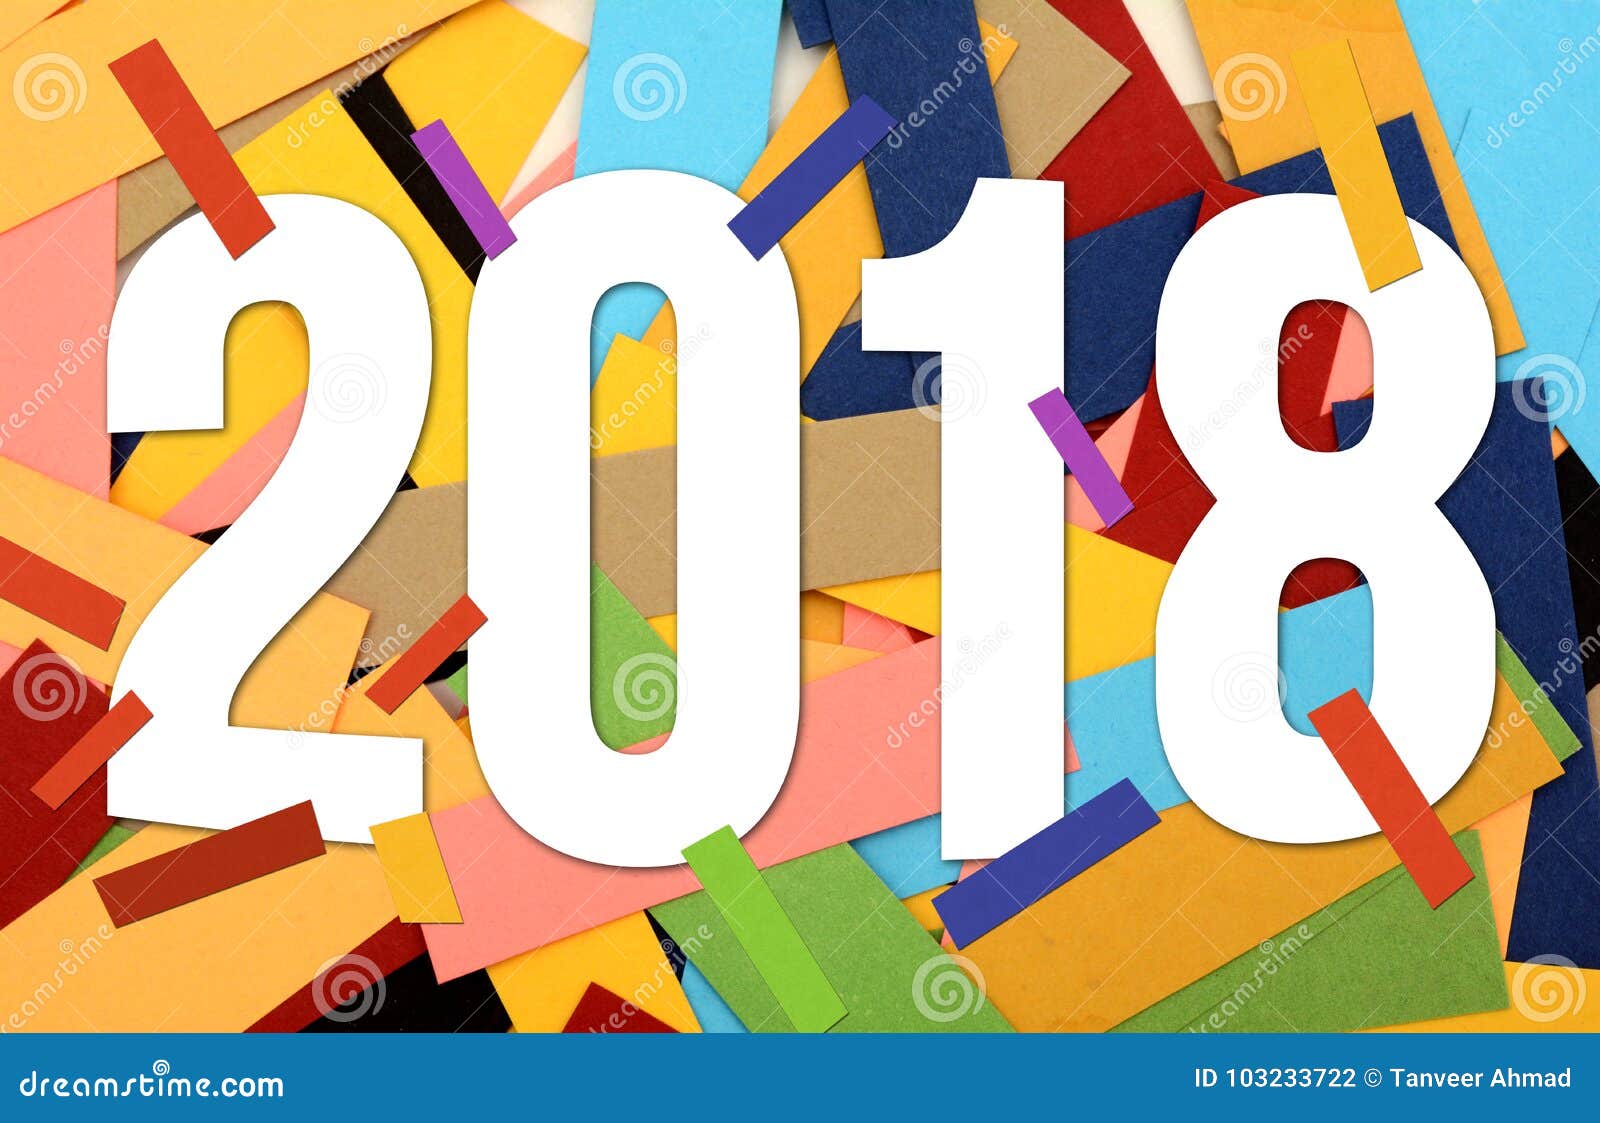 2018 New Year Background With Colorful Papers Stock Photo - Image of